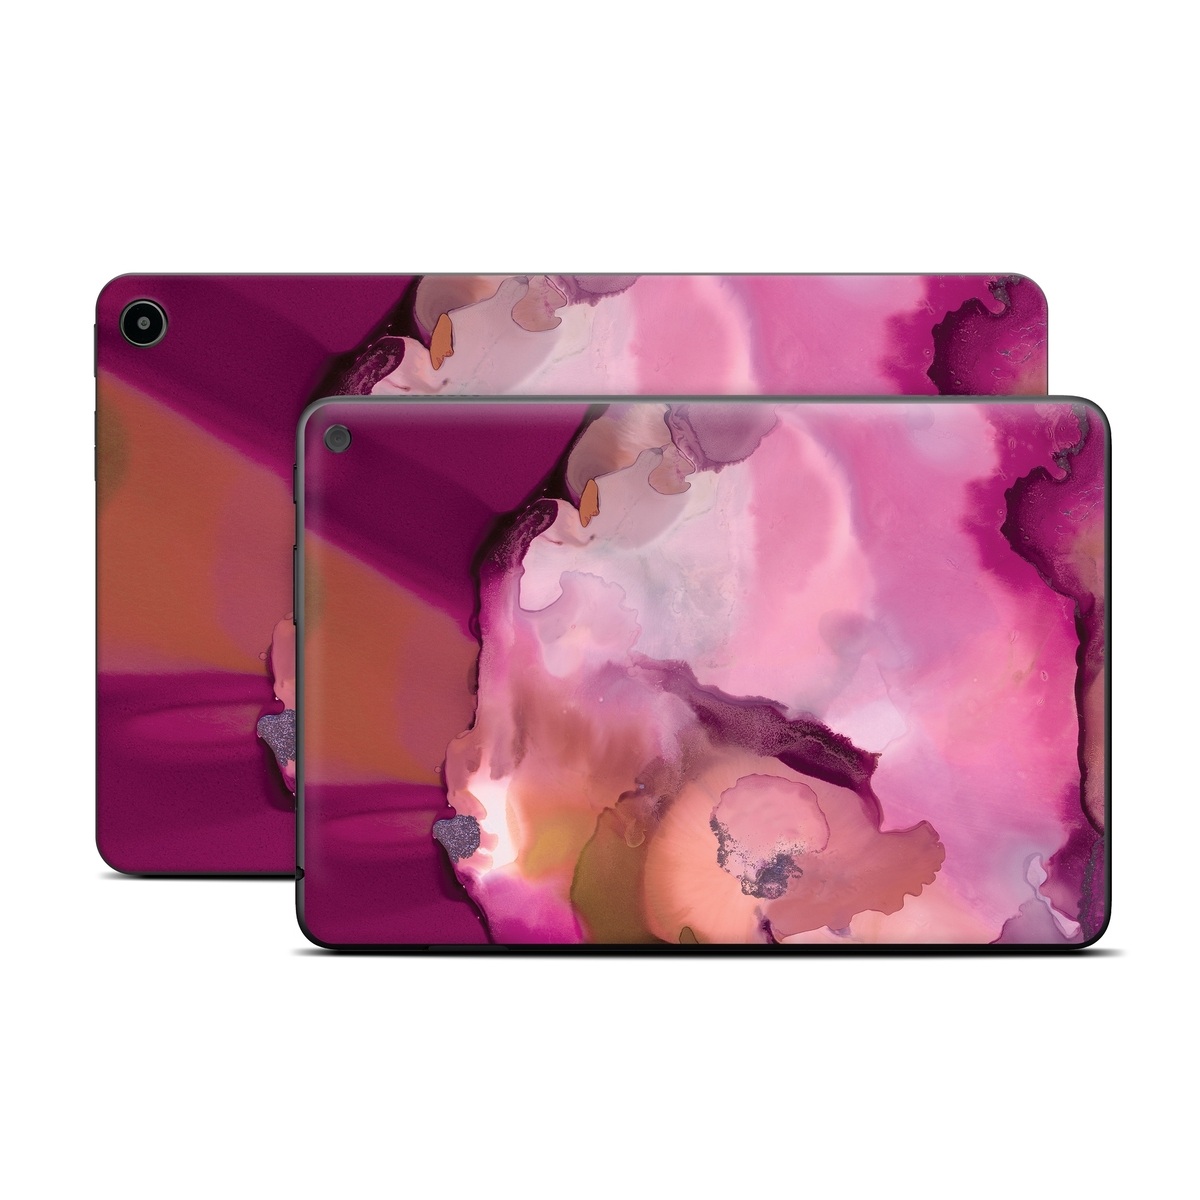 Amazon Fire Tablet Series Skin Skin design of Purple, Pink, Watercolor paint, Magenta, Illustration, Art, with white, red, pink, white colors